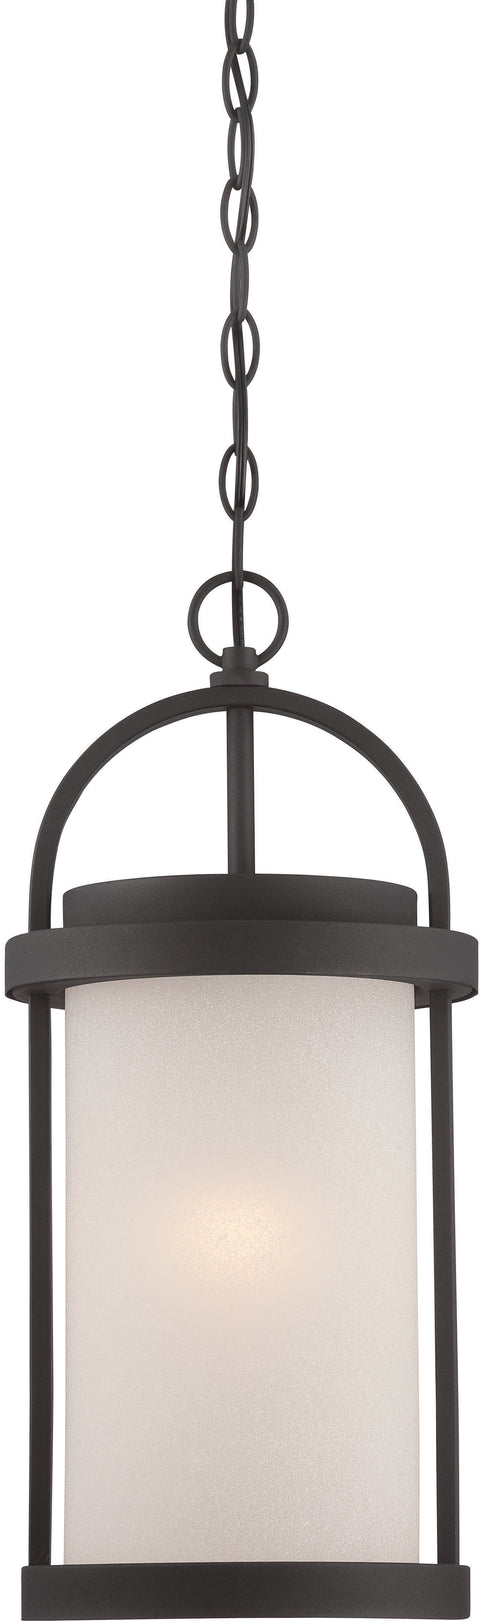 Nuvo Lighting 62/655 Willis LED Outdoor Hanging with Antique White Glass